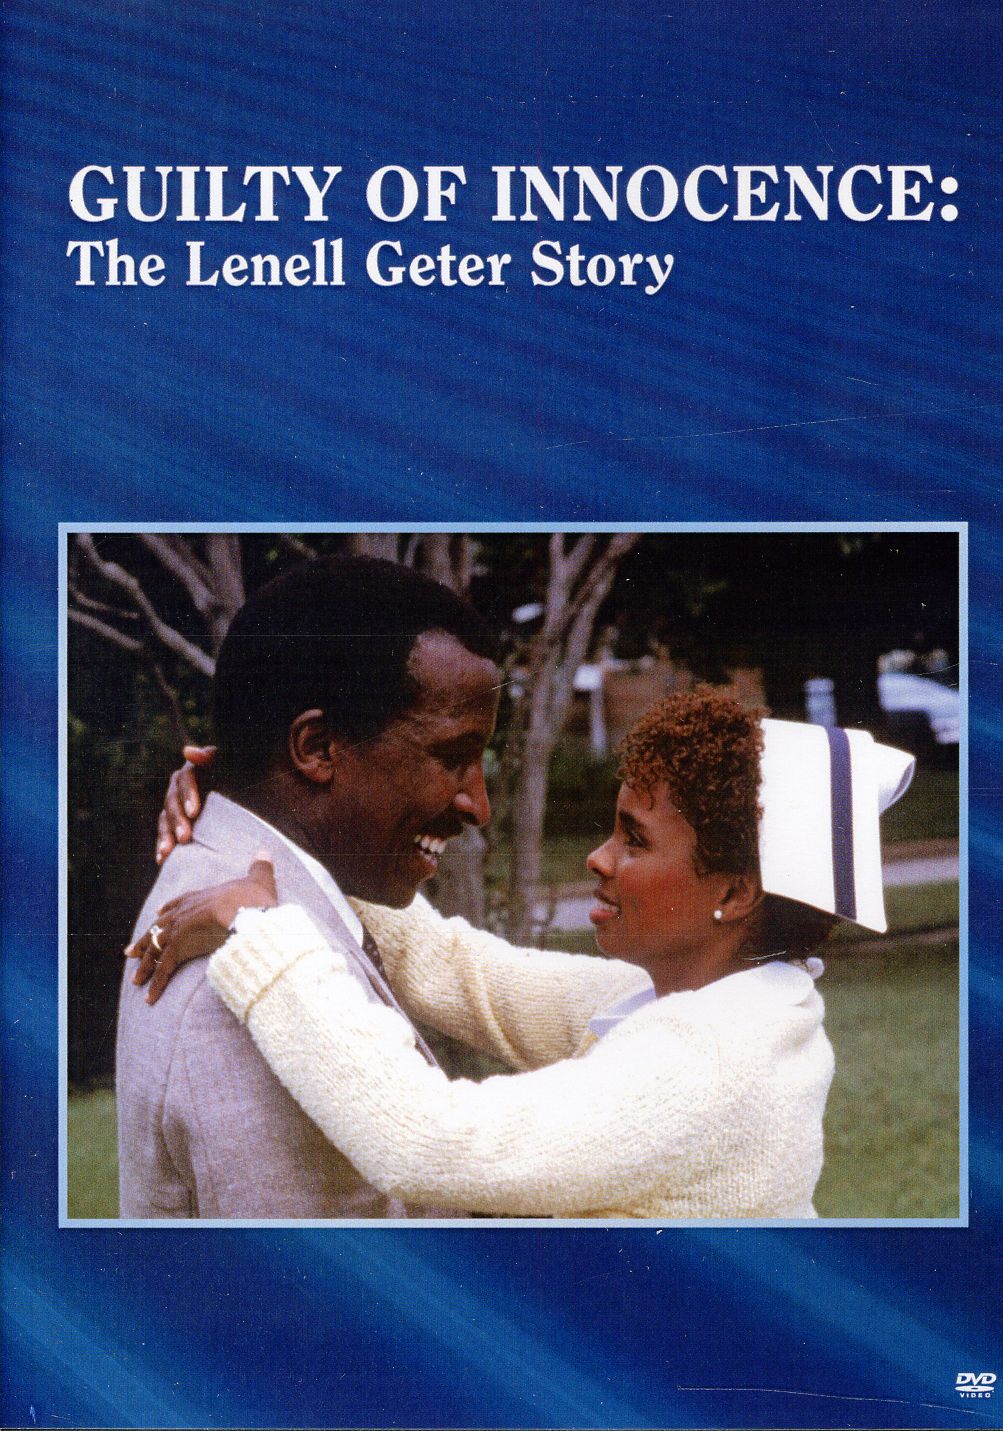 GUILTY OF INNOCENCE: THE LENELL GETER STORY